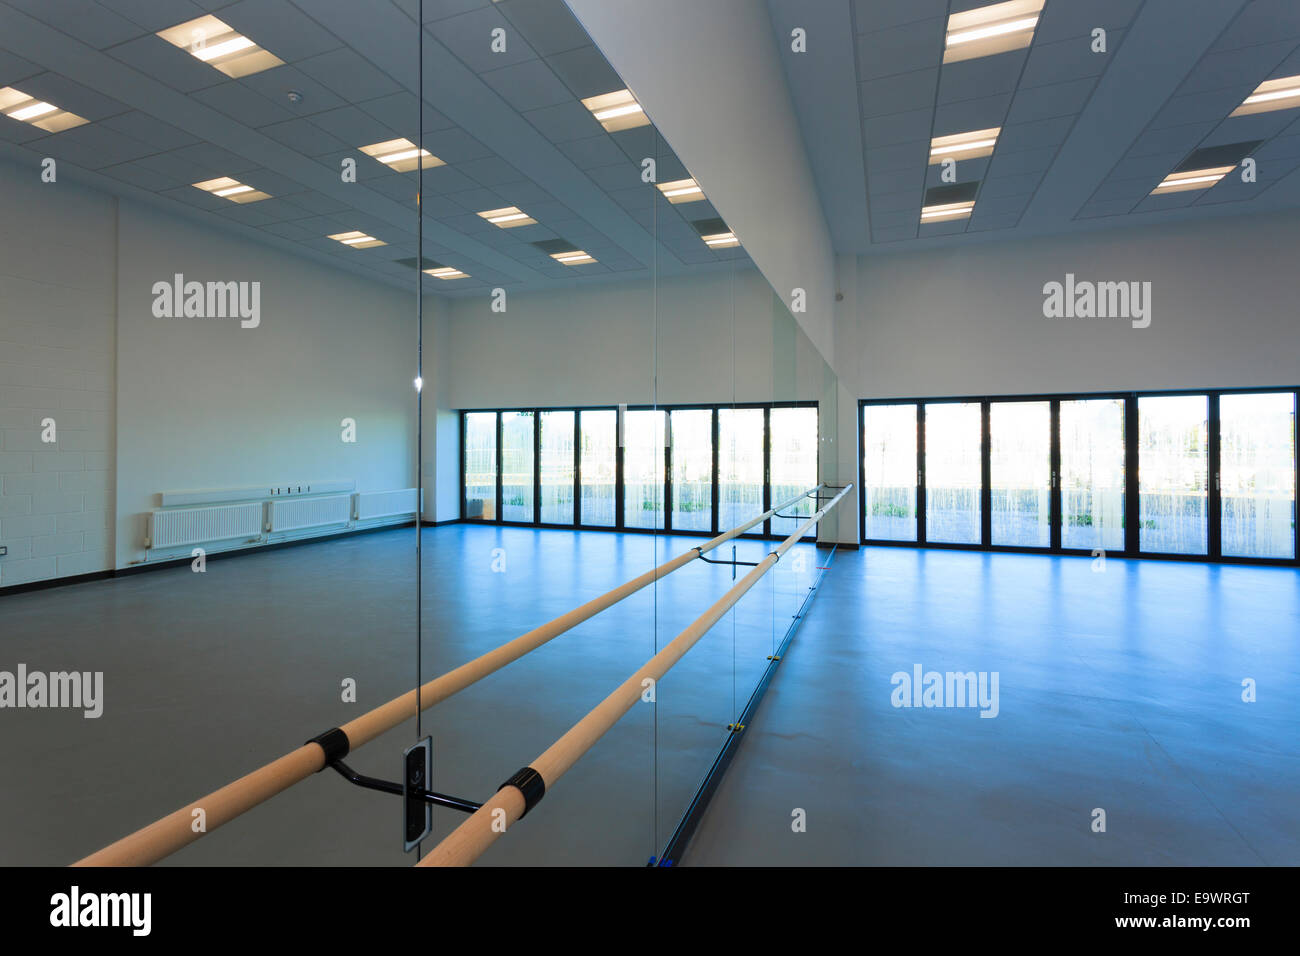 Unoccupied dance studio with mirrors and ballet barre Stock Photo